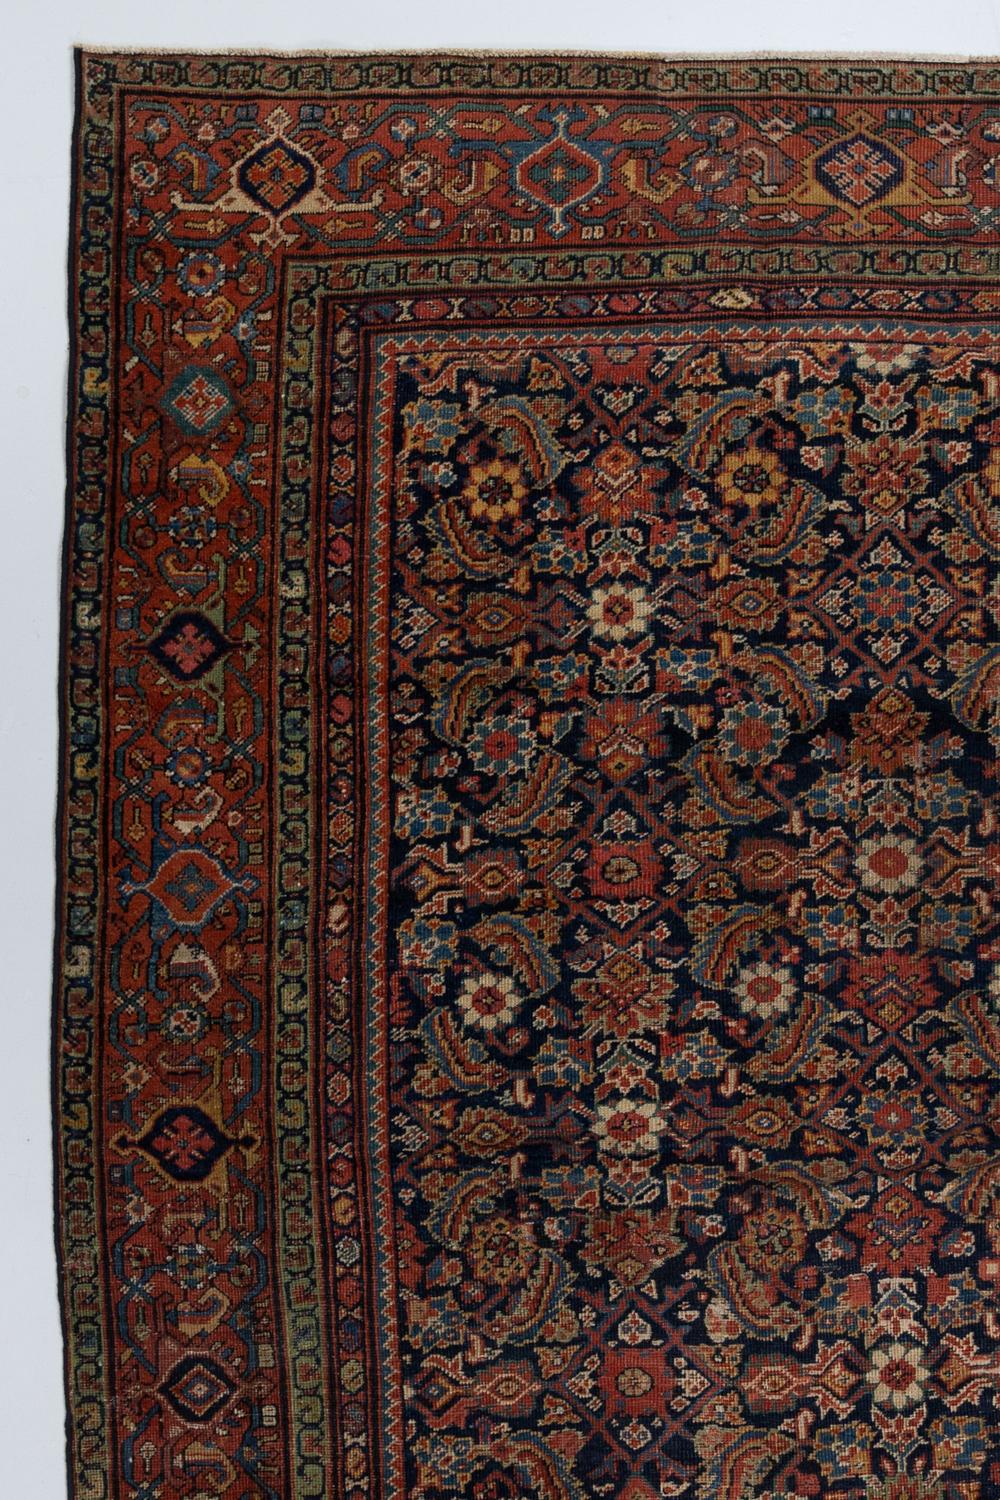 Hand-Woven Oversize Antique Persian Sultanabad Mahal Rug